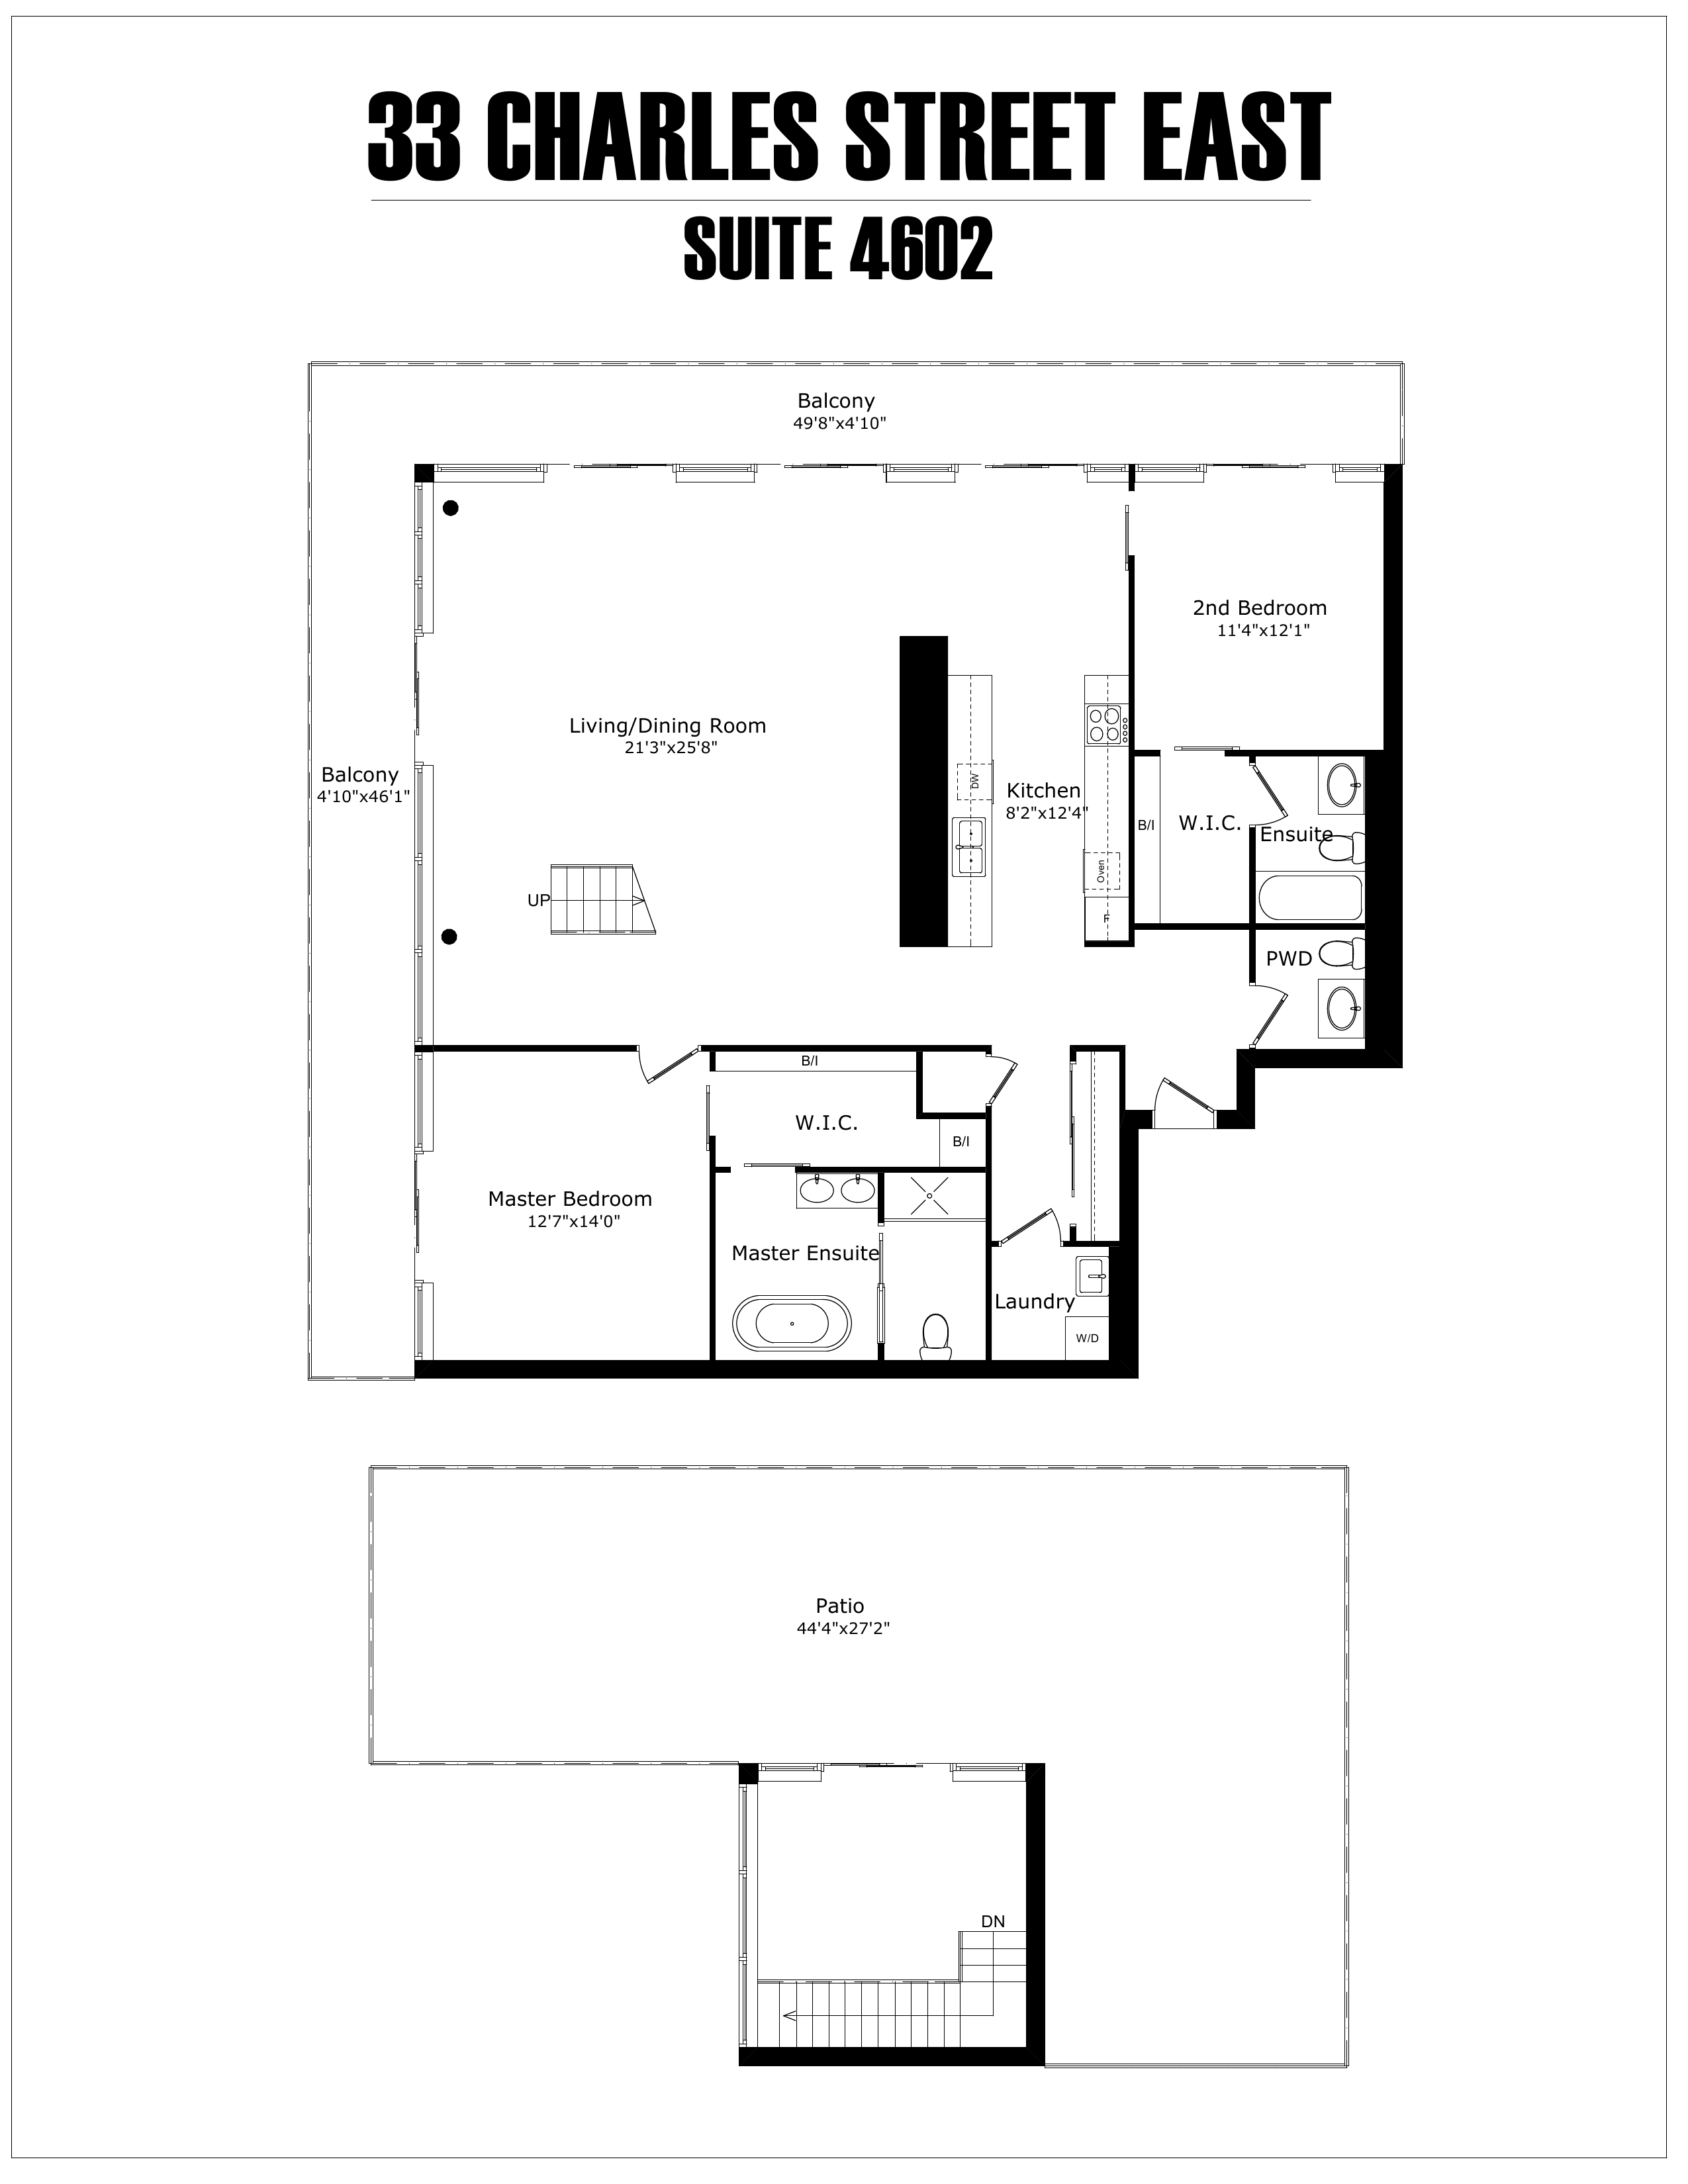 Floor plans for unit 4601 and it shows both upper and lower levels.